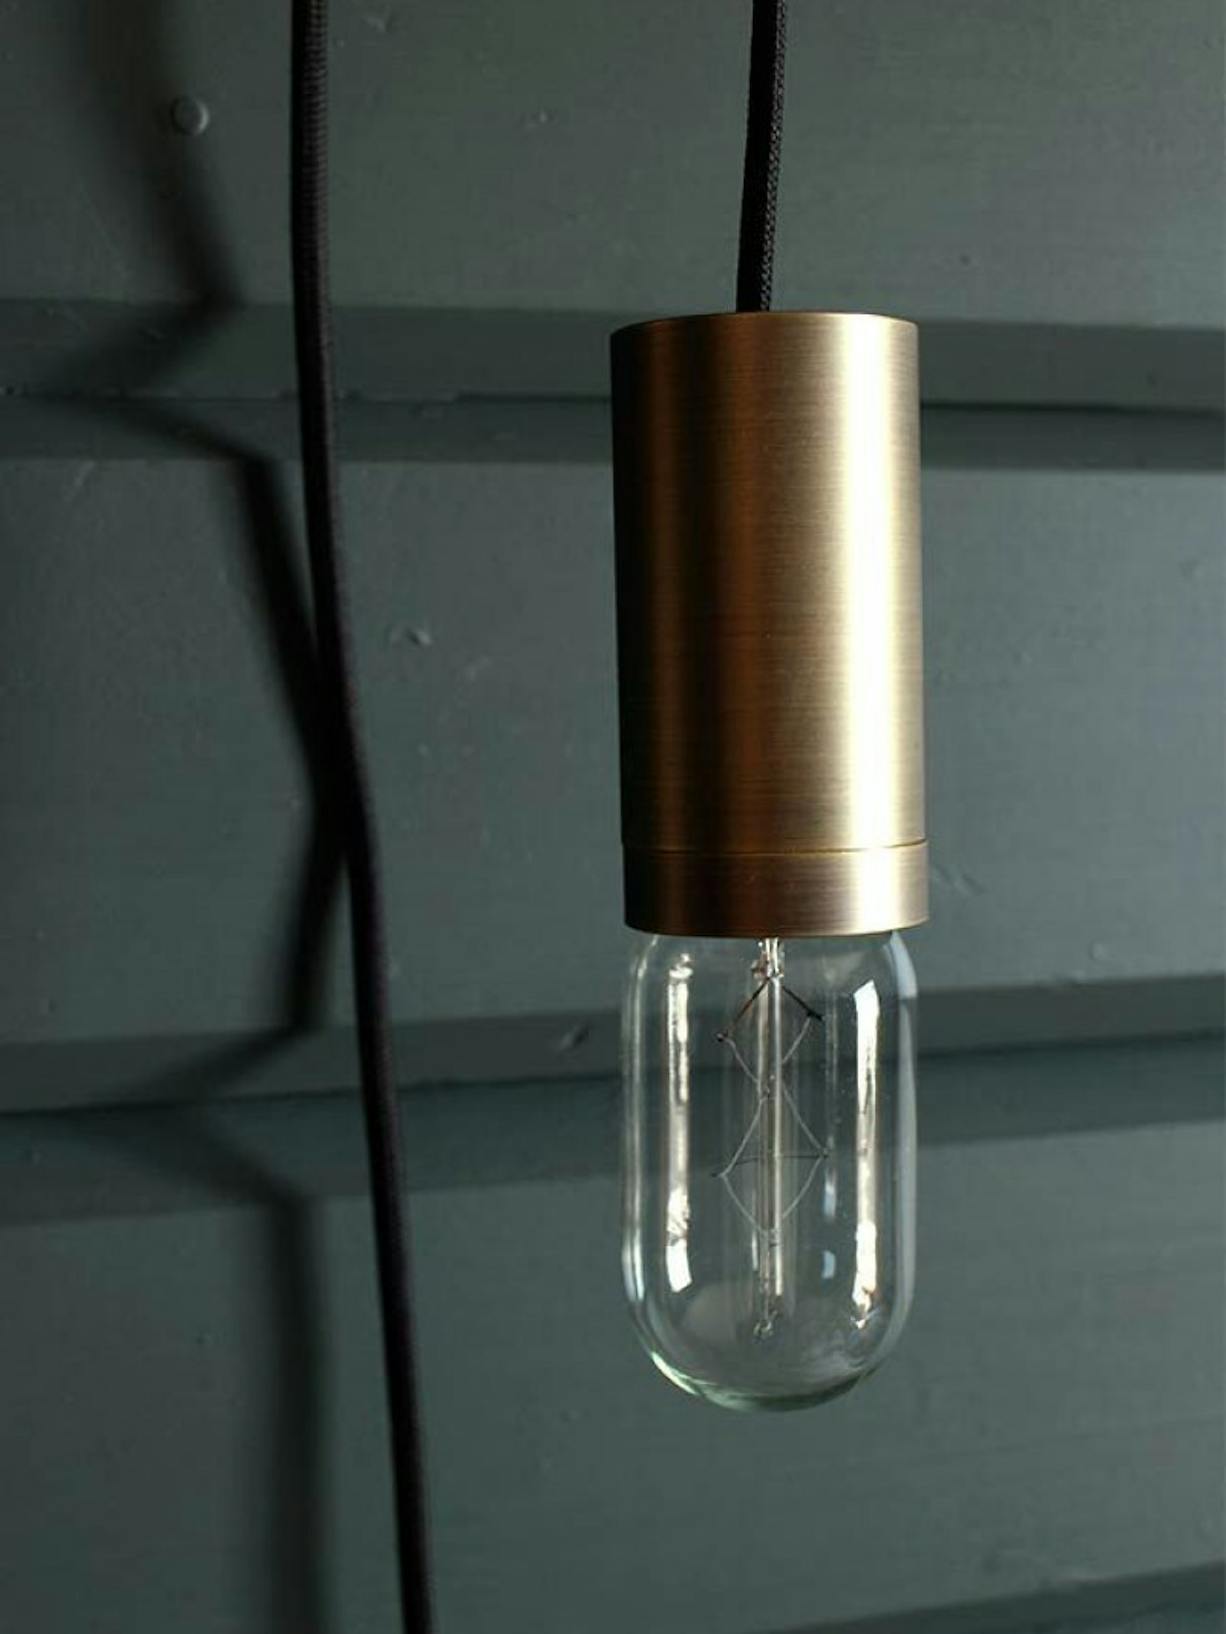 Close-up of Lamp Against Dark Green Wooden Wall